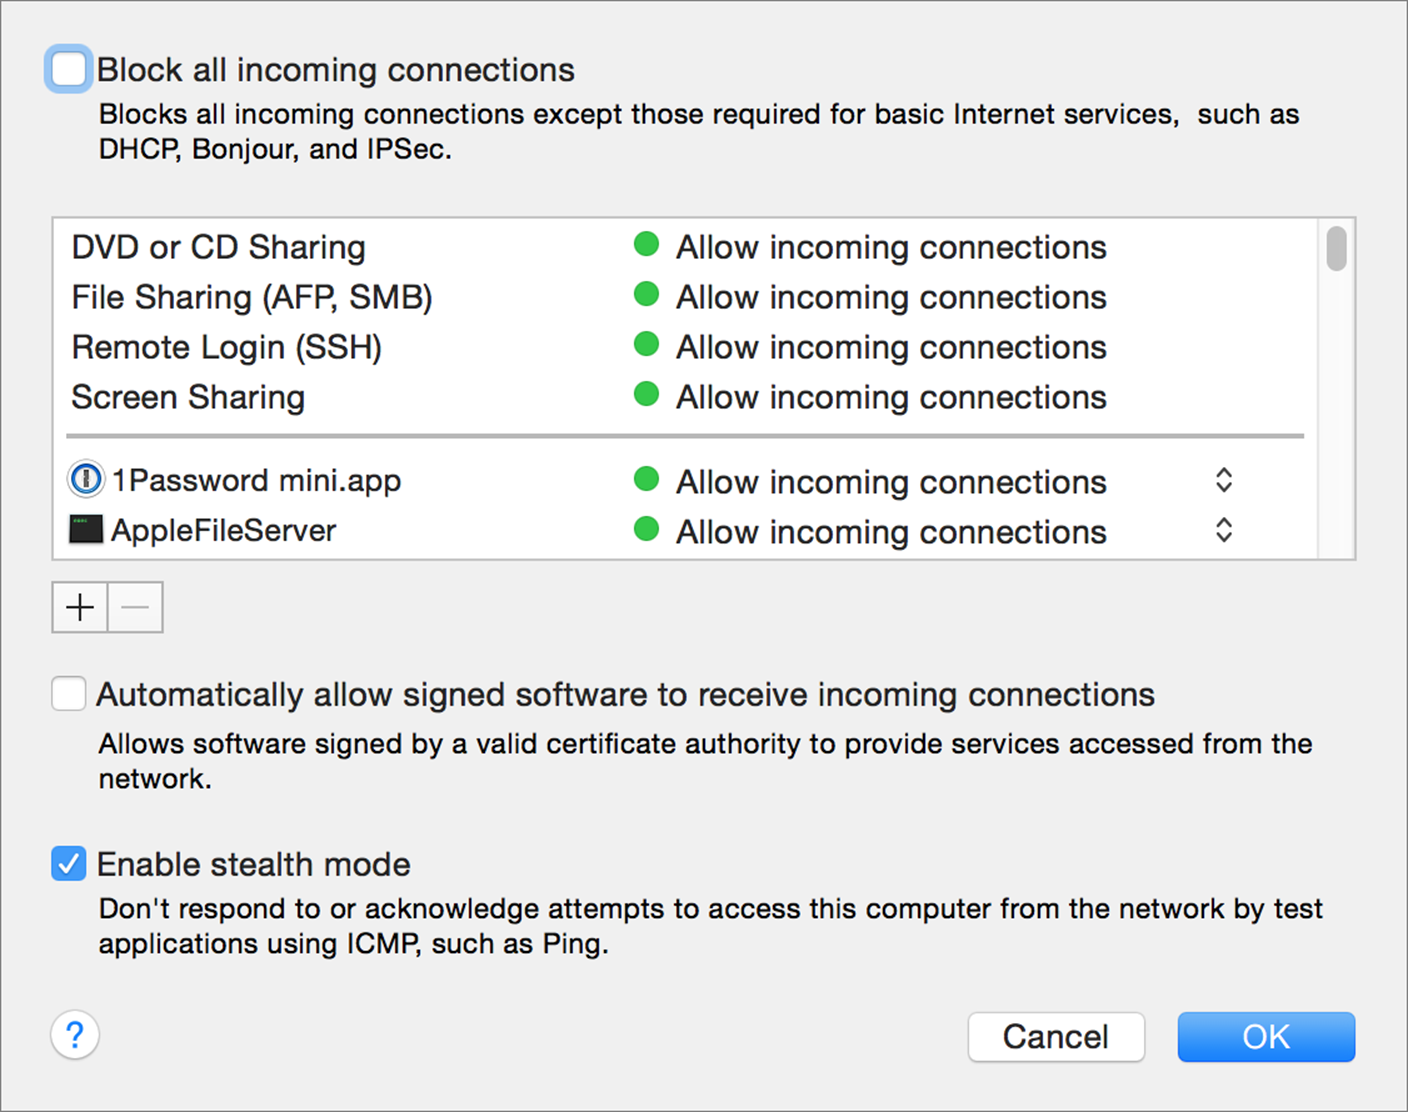 **Figure 12:** Customize your firewall options in this dialog.